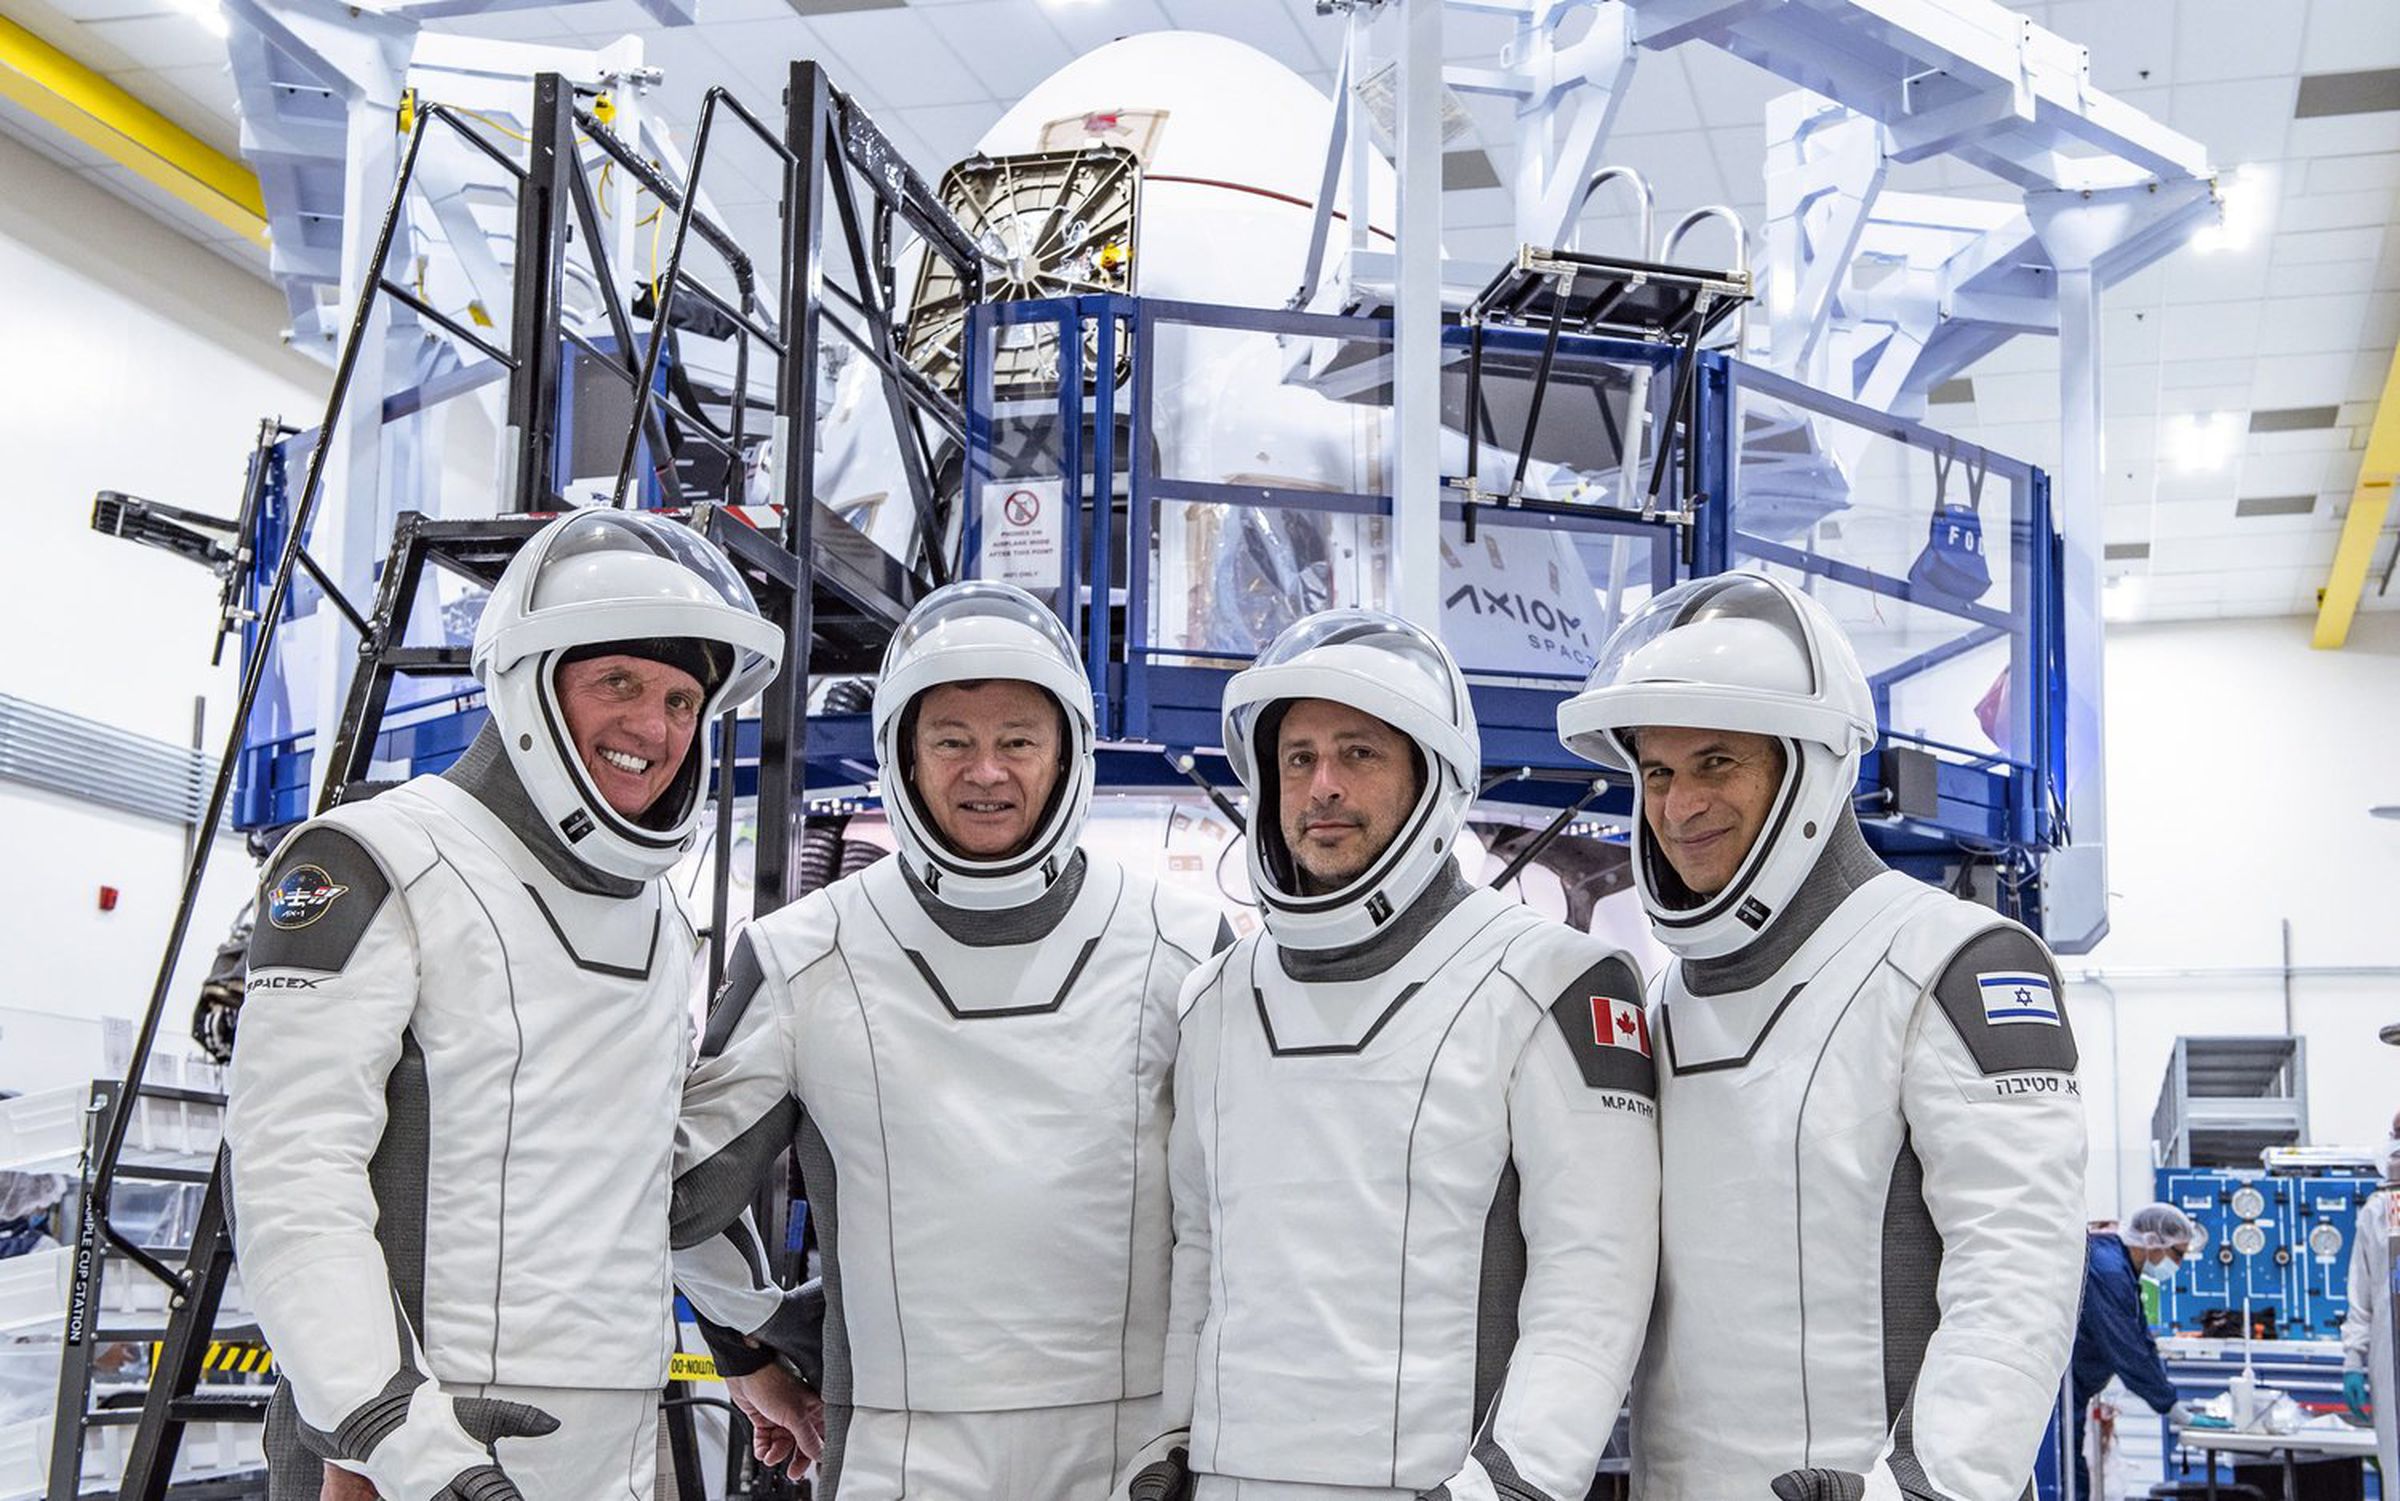 From L to R: Larry Connor, Michael López-Alegría, Mark Pathy, and Eytan Stibbe in their SpaceX pressure suits